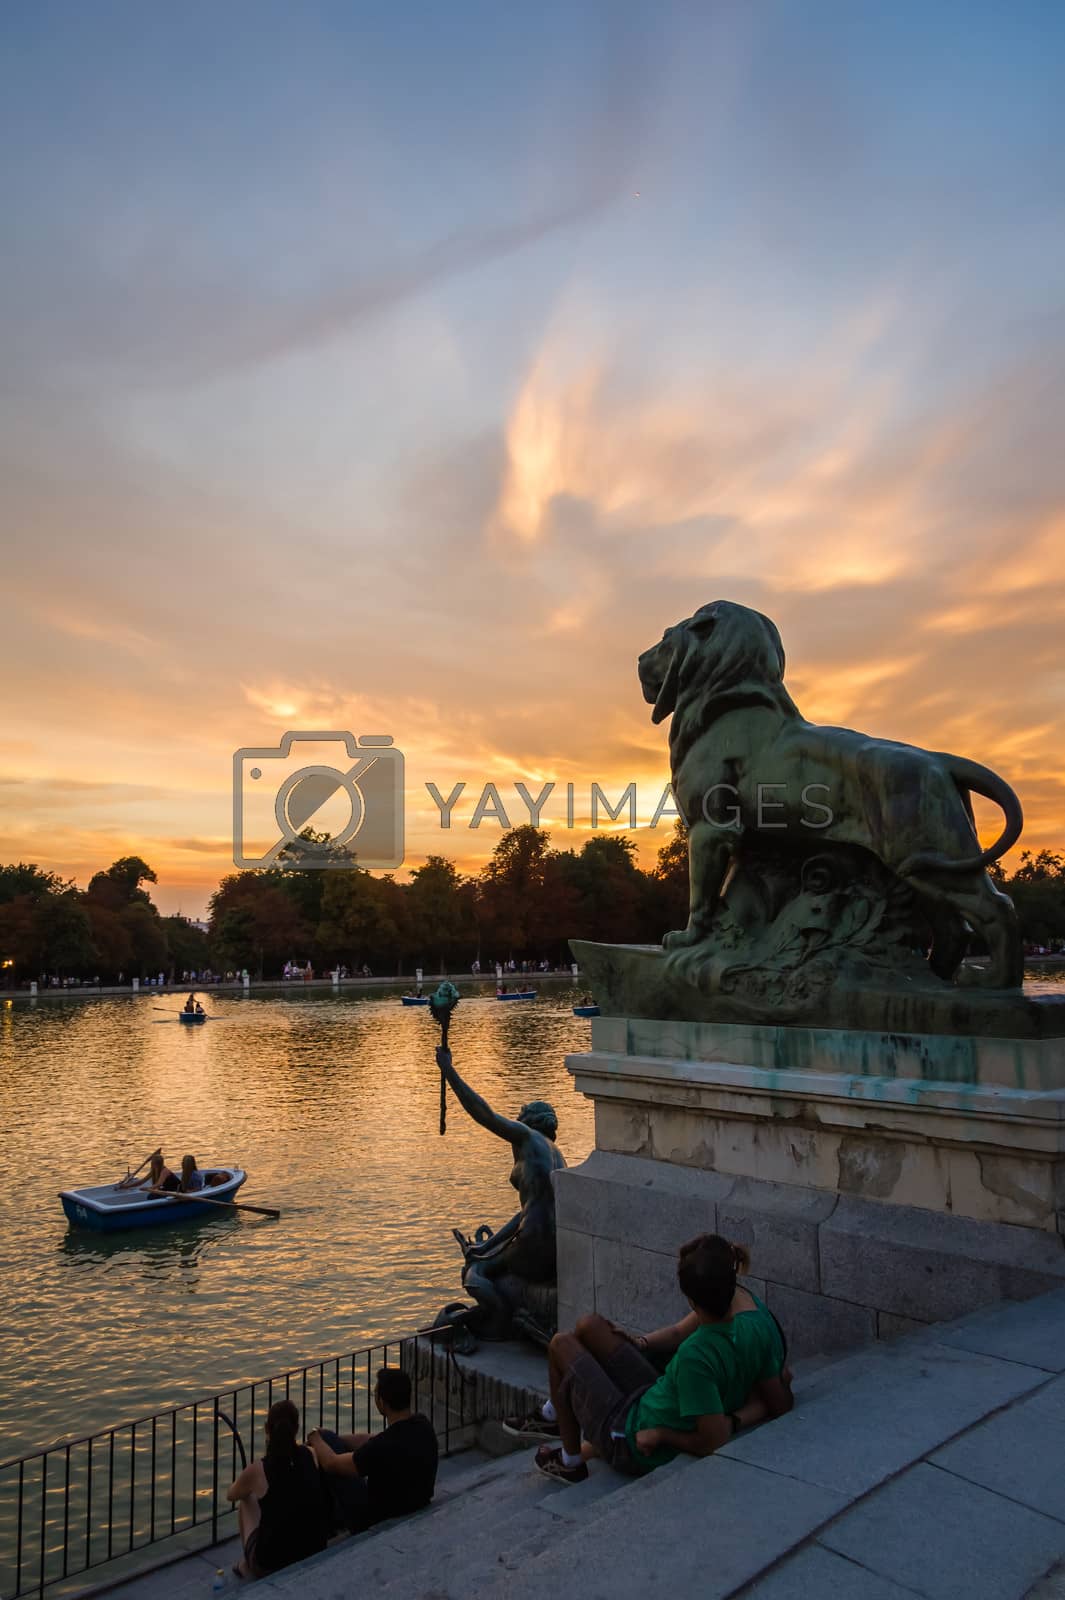 Royalty free image of Lion sculpture in Buen Retiro park lake, Madrid by doble.d